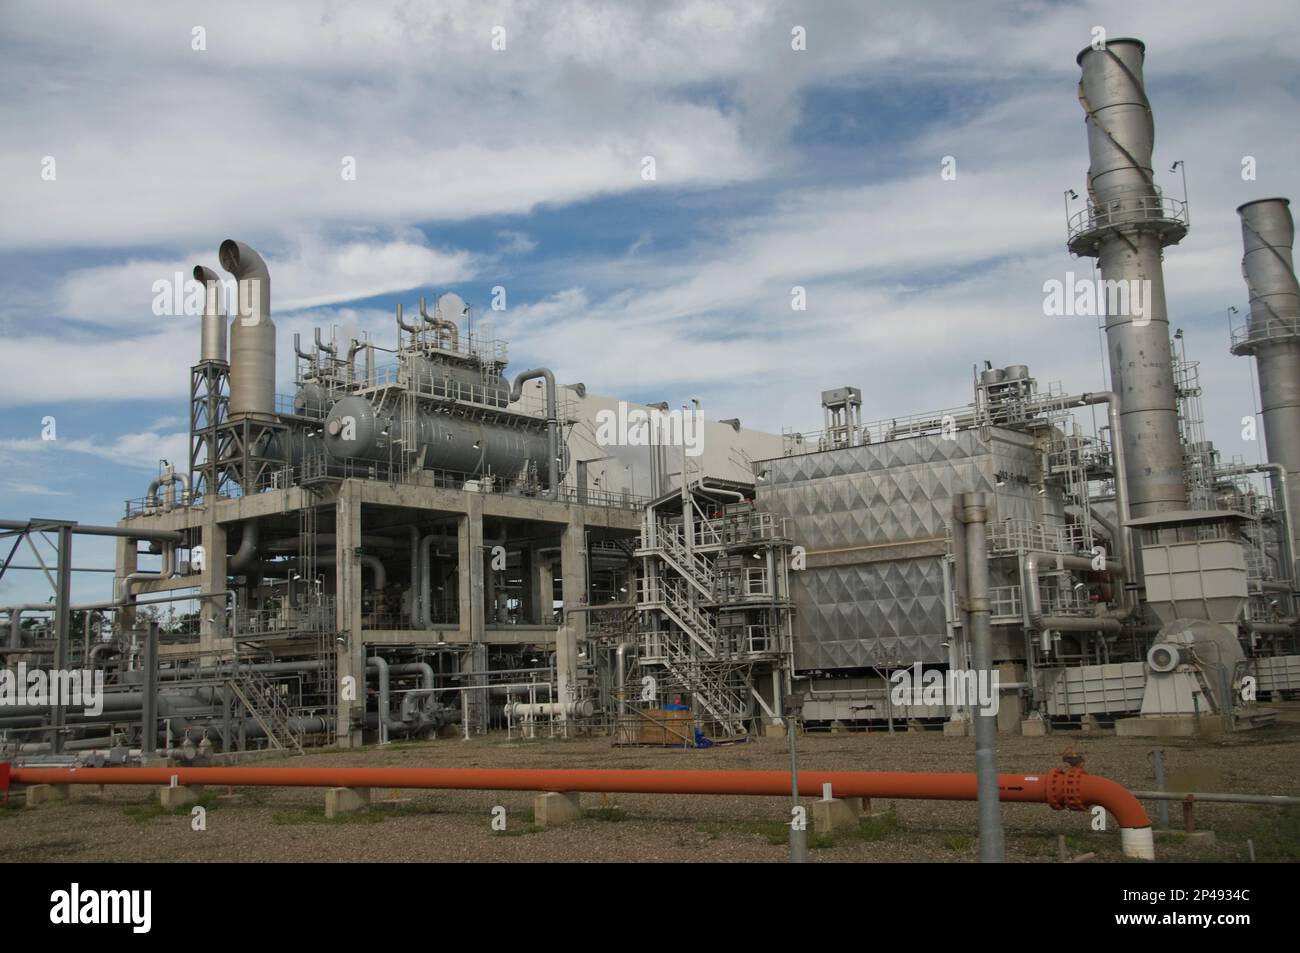 Pipework and vessels, Tangguh LNG (Liquified Natural Gas) Plant. near Babo, West Papus, Indonesia Stock Photo